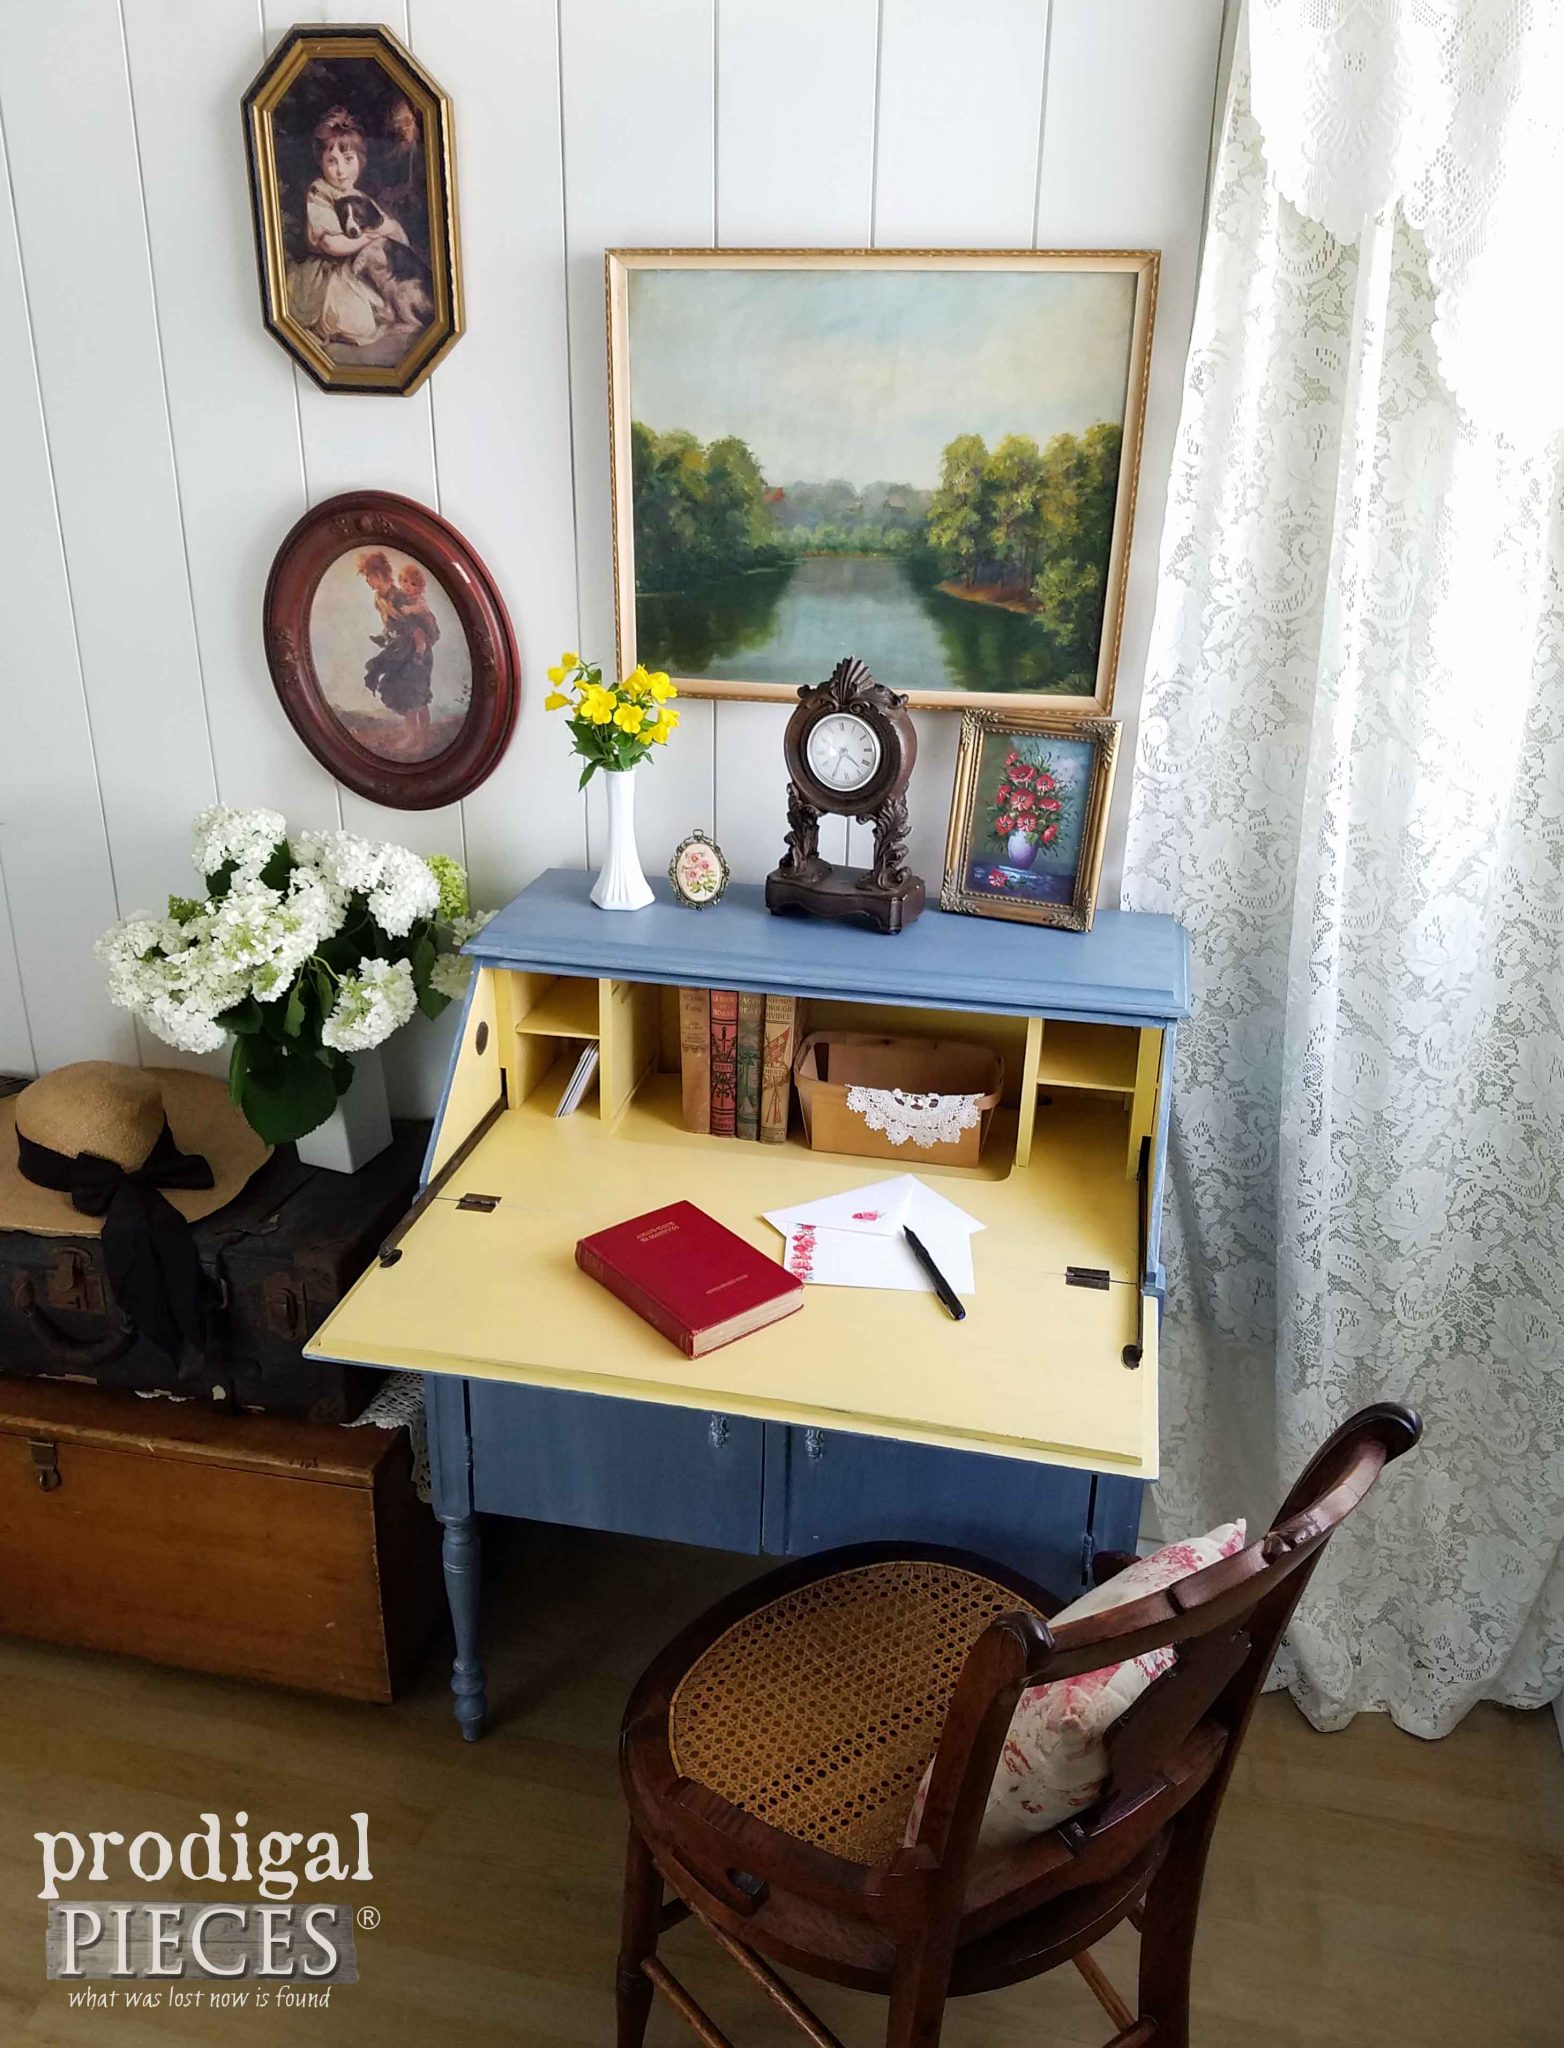 A Pop of Yellow for fun in this Vintage Secretary Desk Makeover by Prodigal Pieces | prodigalpieces.com